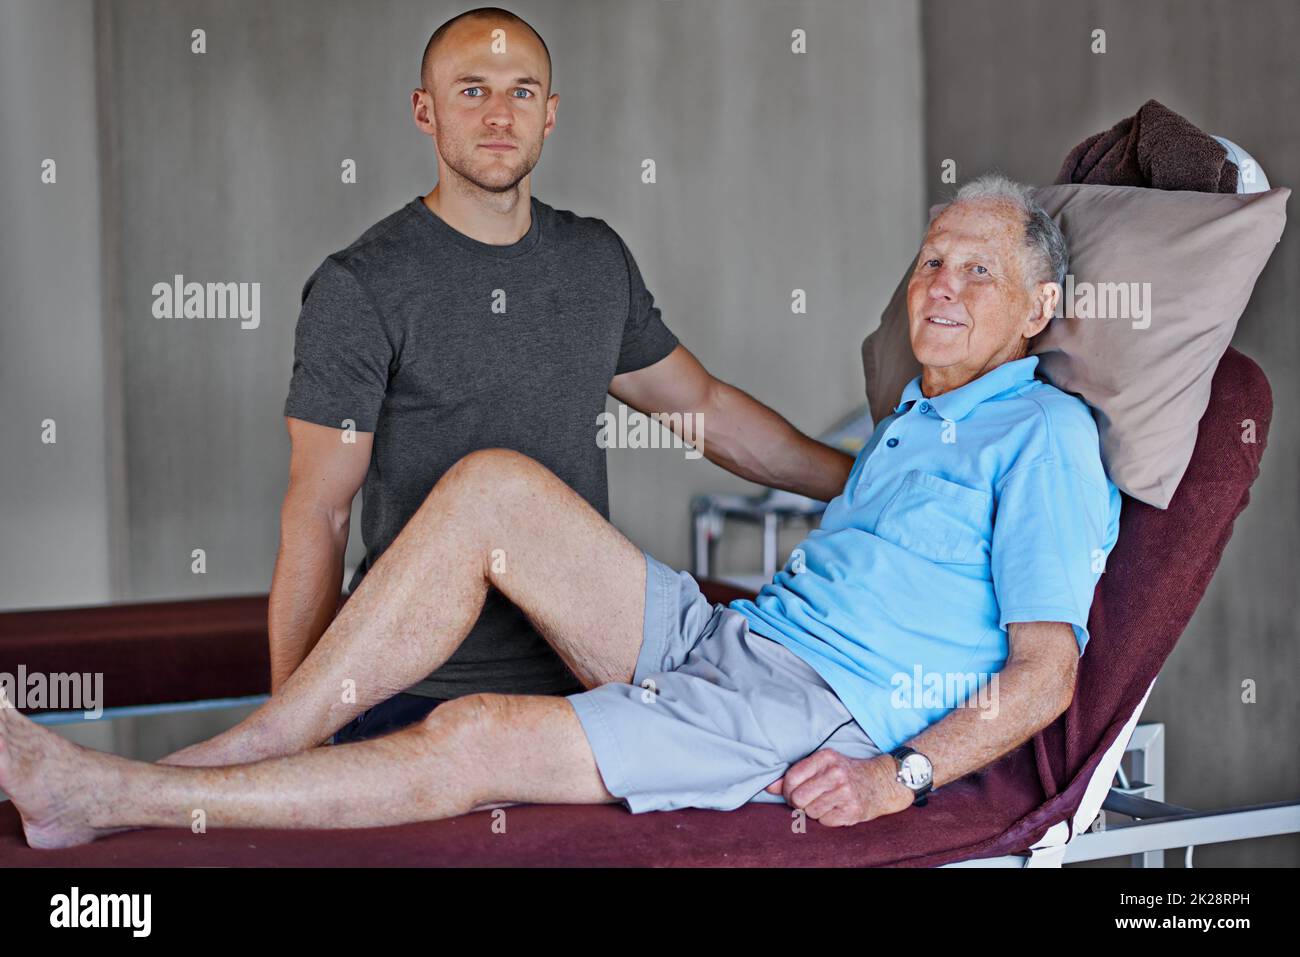 Physio takes two. Portrait of an elderly man having a physiotherapy session with a male therapist. Stock Photo